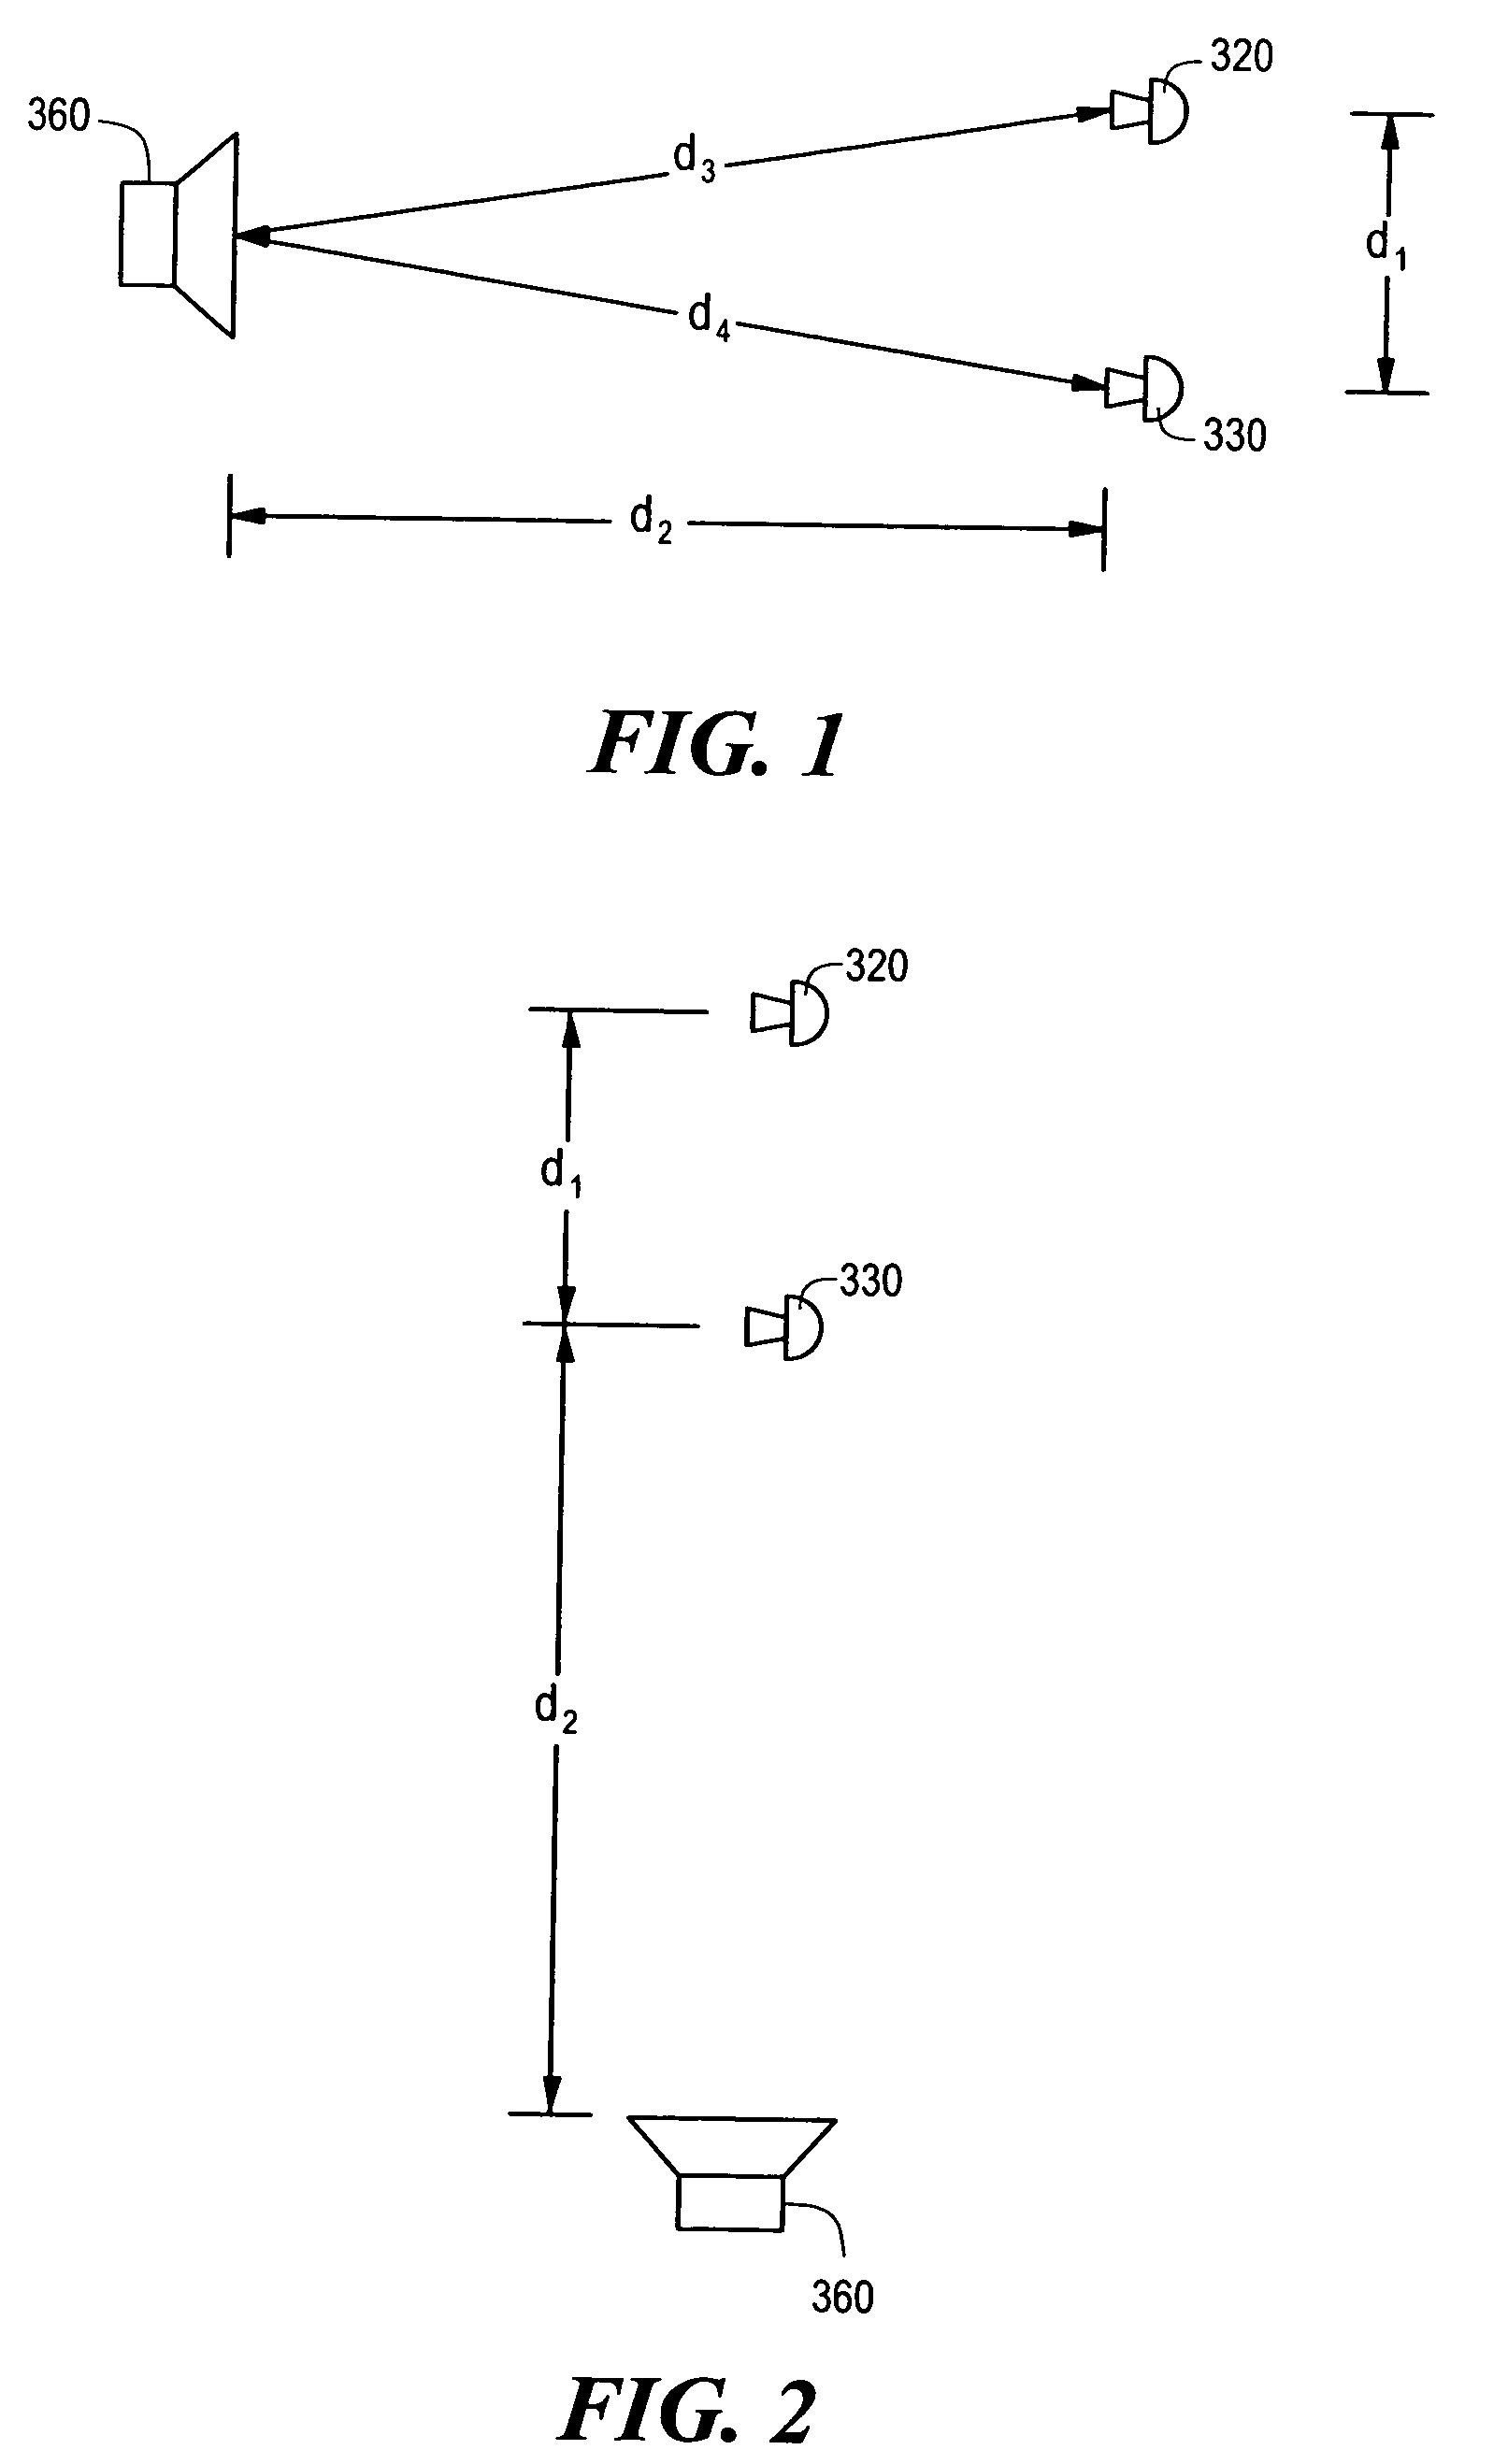 Hearing aid having acoustical feedback protection